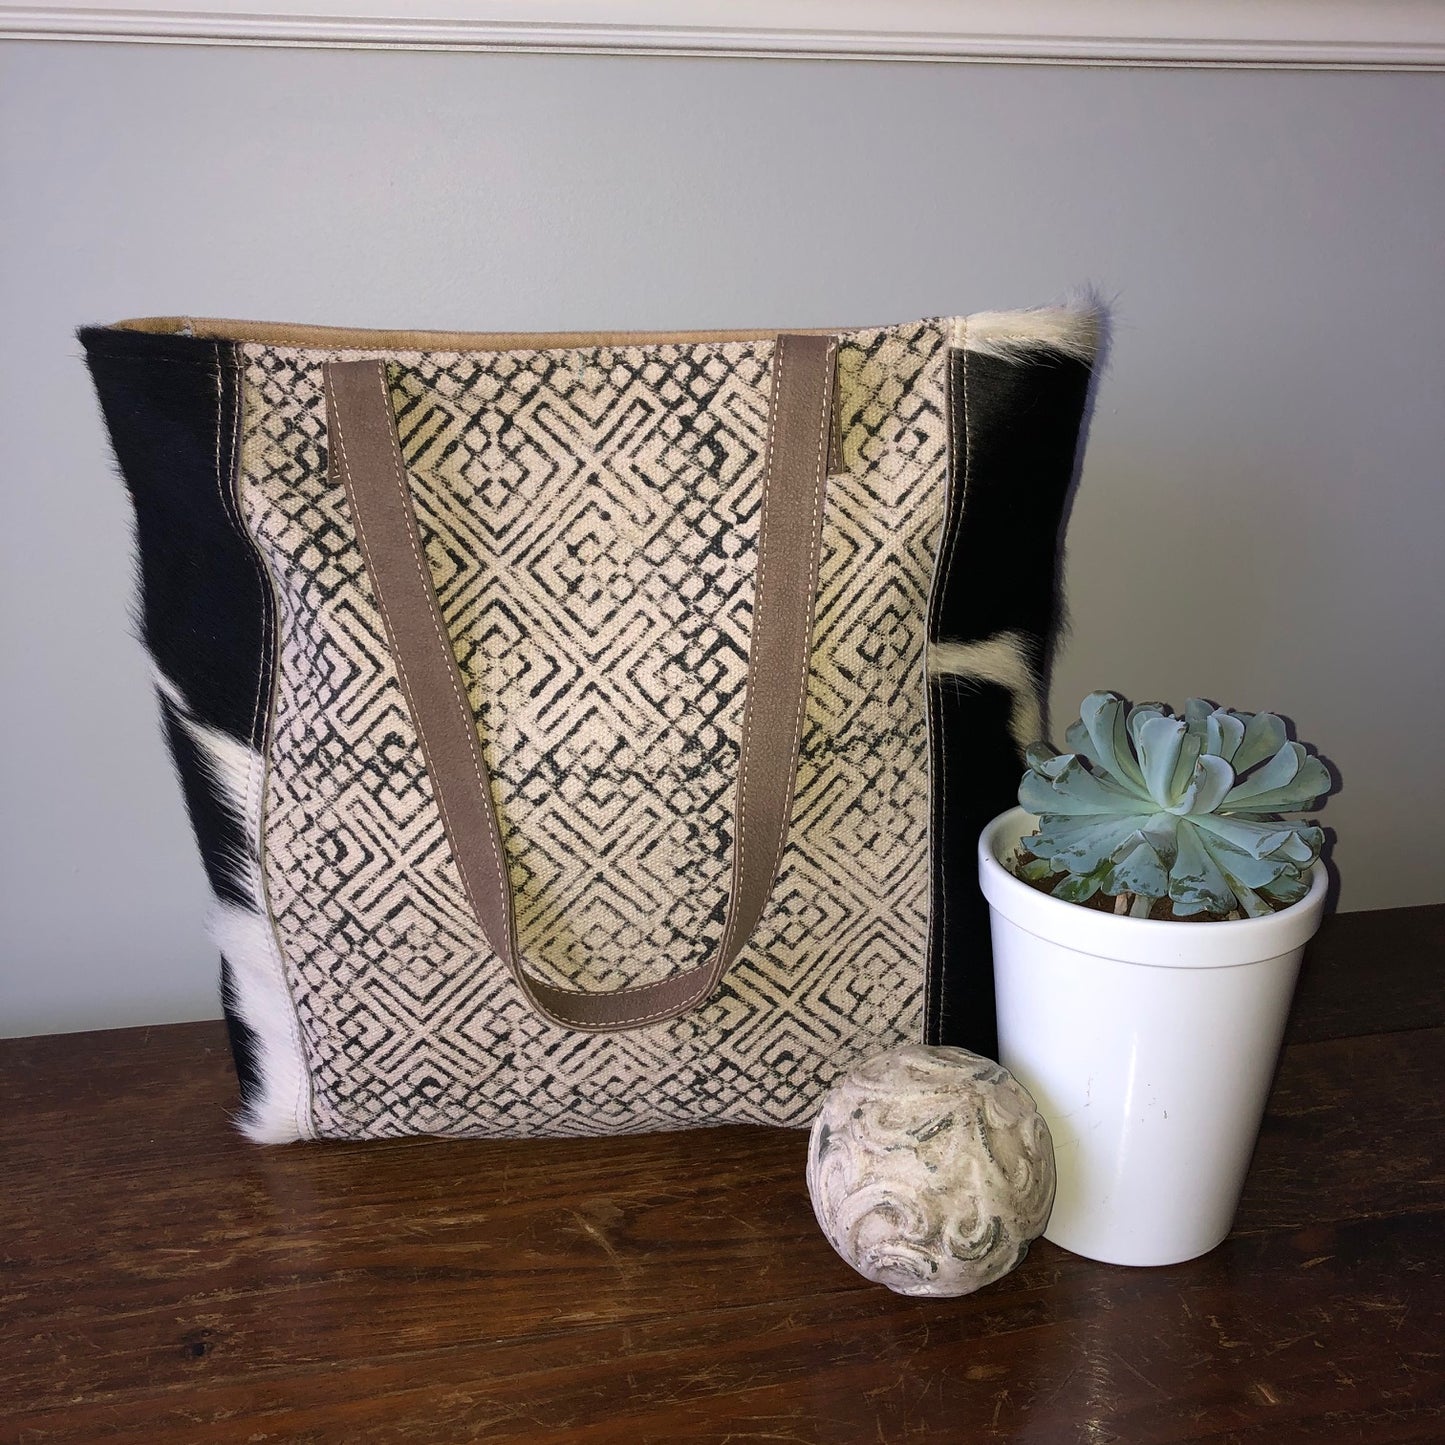 Black & White Hair on Hide Shoulder Bag Purse ~ Classic and Gorgeous Sustainable Tote!